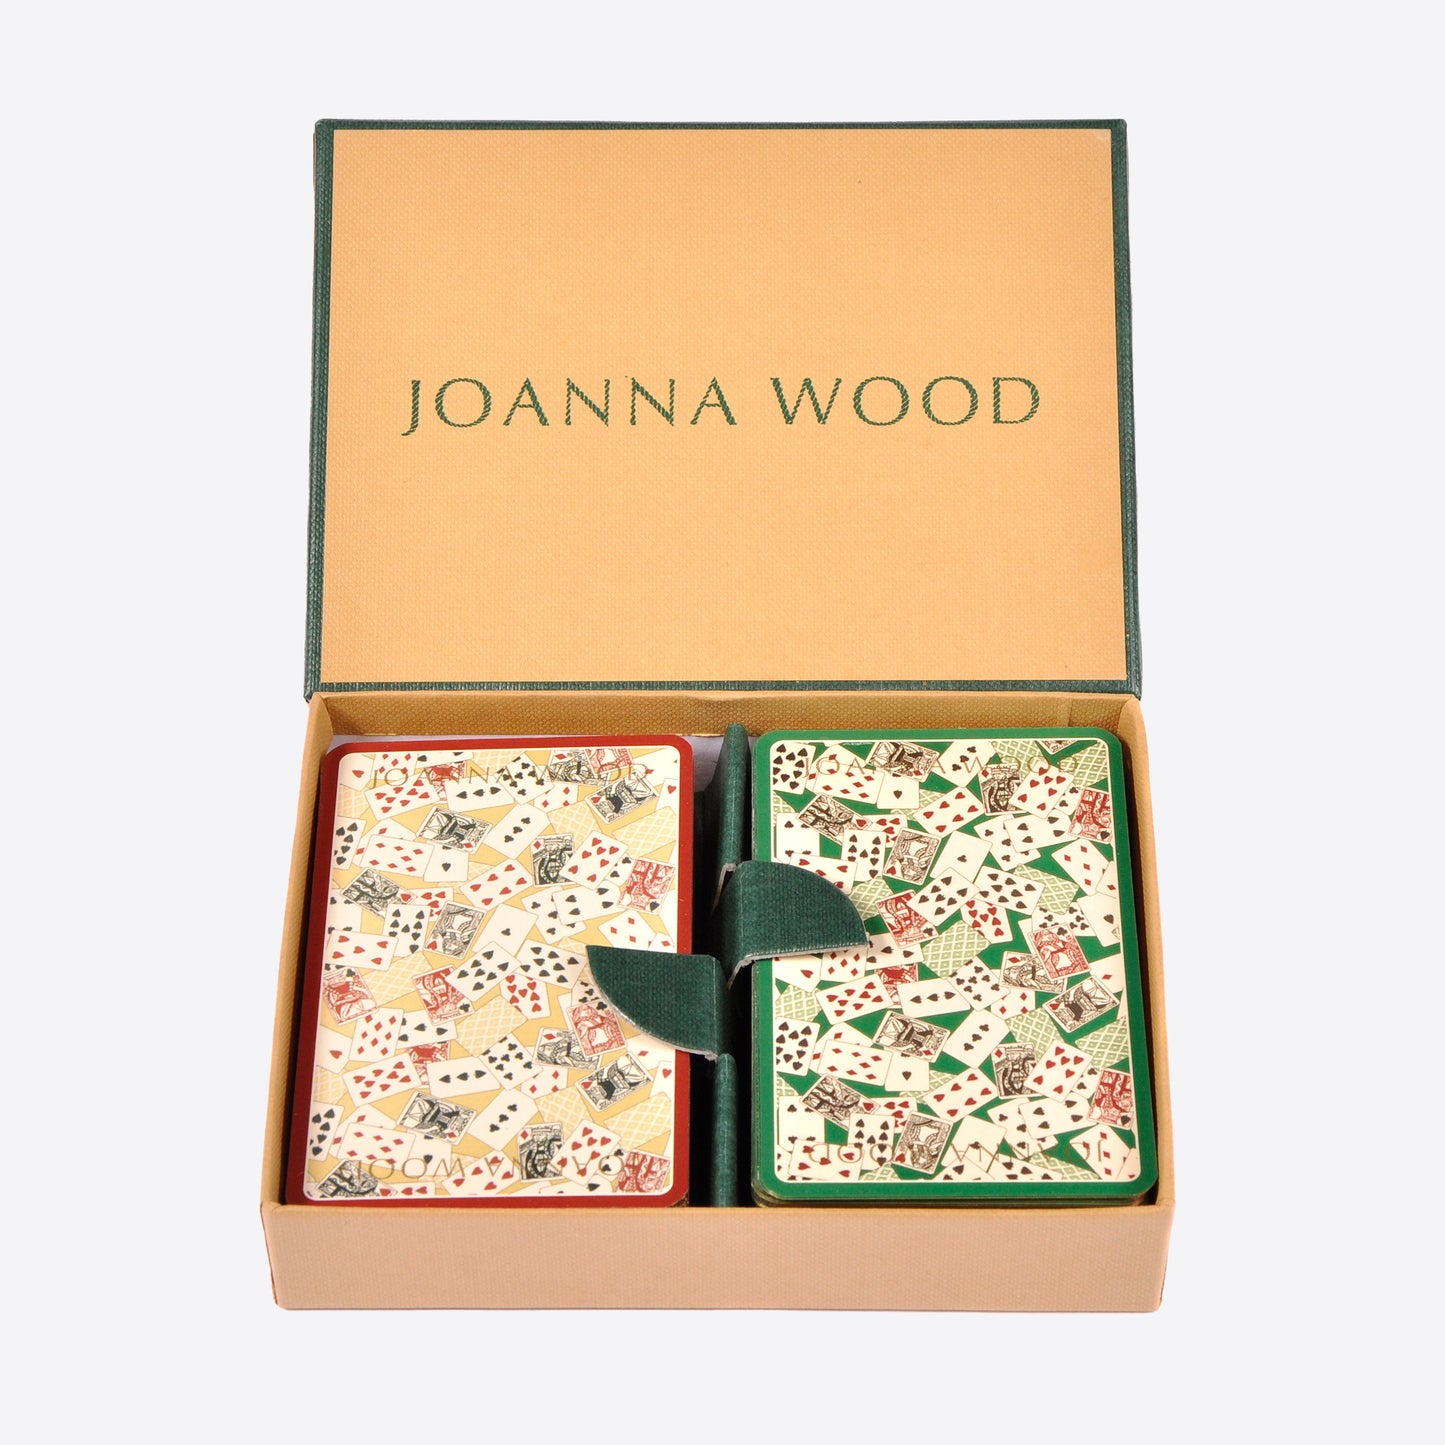 Joanna Wood Playing Cards Two Sets in a box